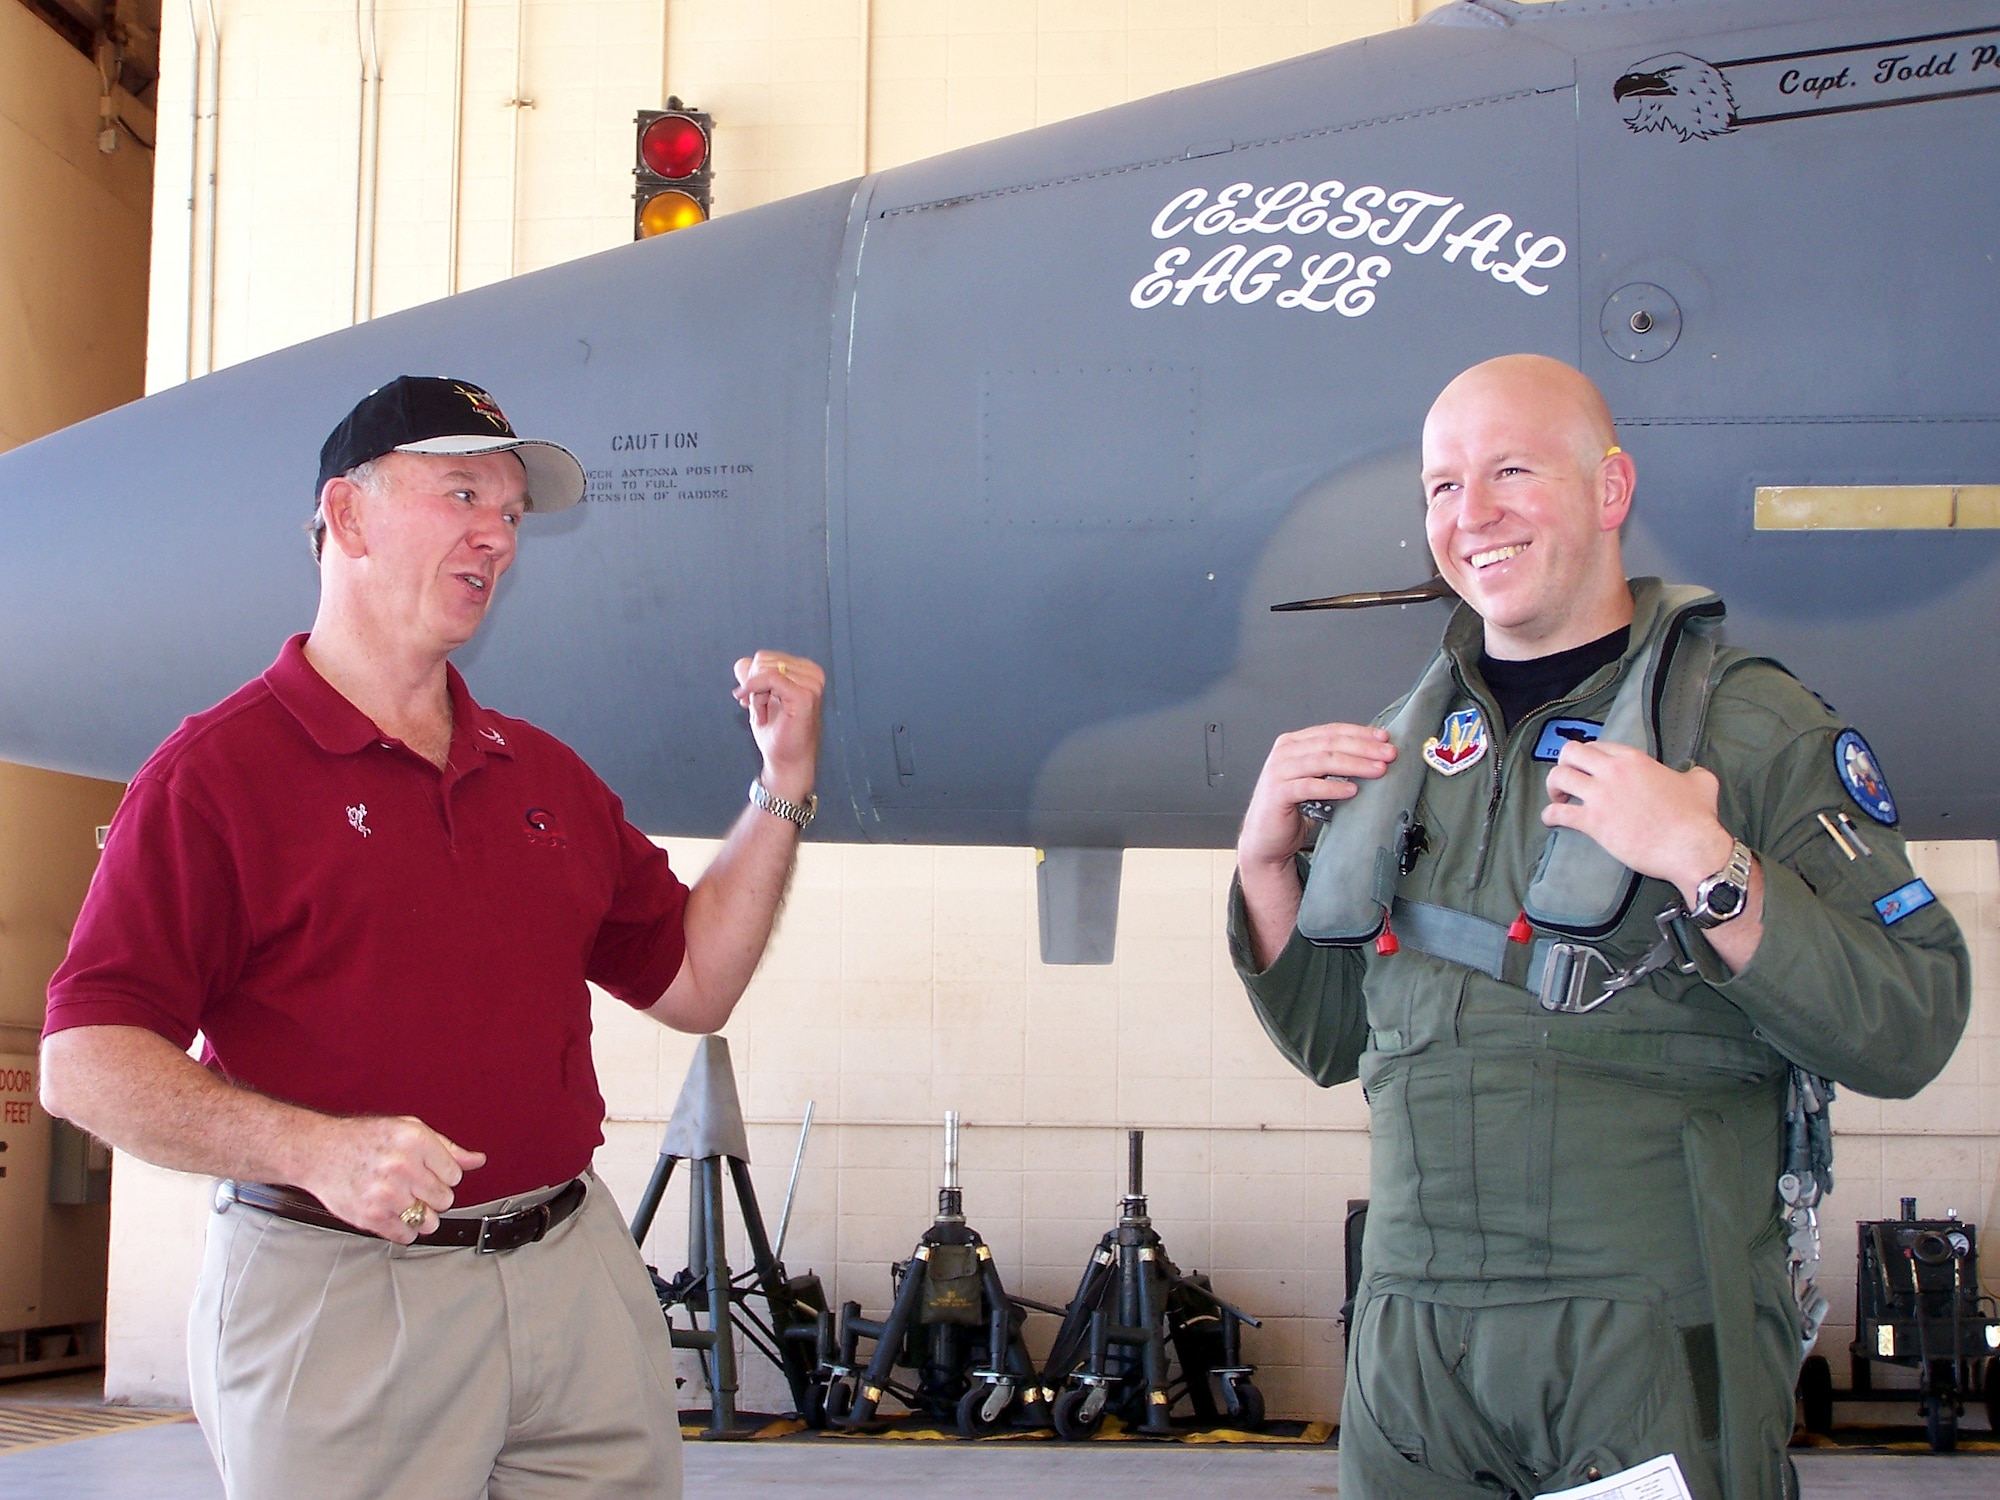 Retired Maj. Gen. Doug Pearson (left) and Capt. Todd Pearson (right), 390th Fighter Squadron pilot from Mountain Home Air Force Base, Idaho, joke around before Captain Pearson took off on the Celestial Eagle remembrance flight Sept. 13 at Homestead Air Reserve Base. General Pearson flew the exact same F-15, now assigned to the Florida Air National Guard 125th Fighter Wing, exactly 22 years prior while accomplishing the only successful satellite kill by an aircraft launched missile in history. (U.S. Air Force photo/Senior Airman Erik Hofmeyer)